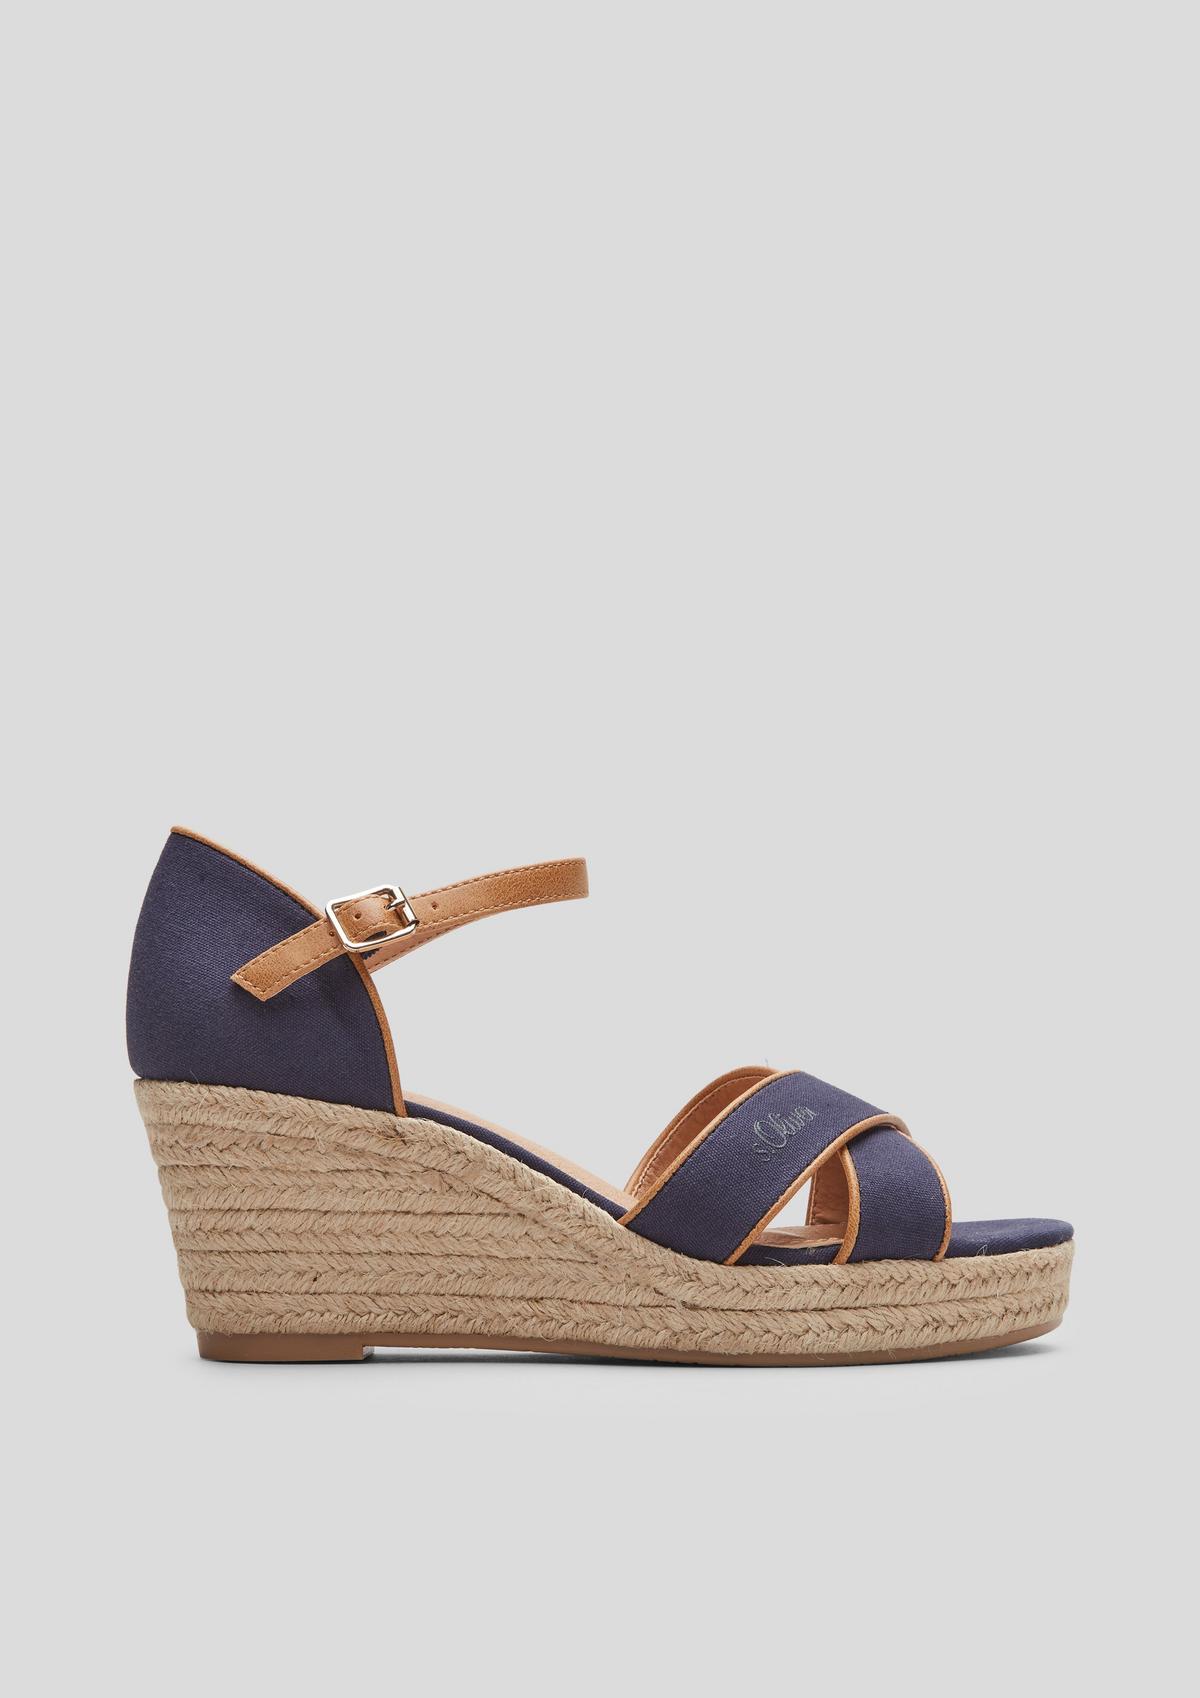 s.Oliver Wedges im Materialmix